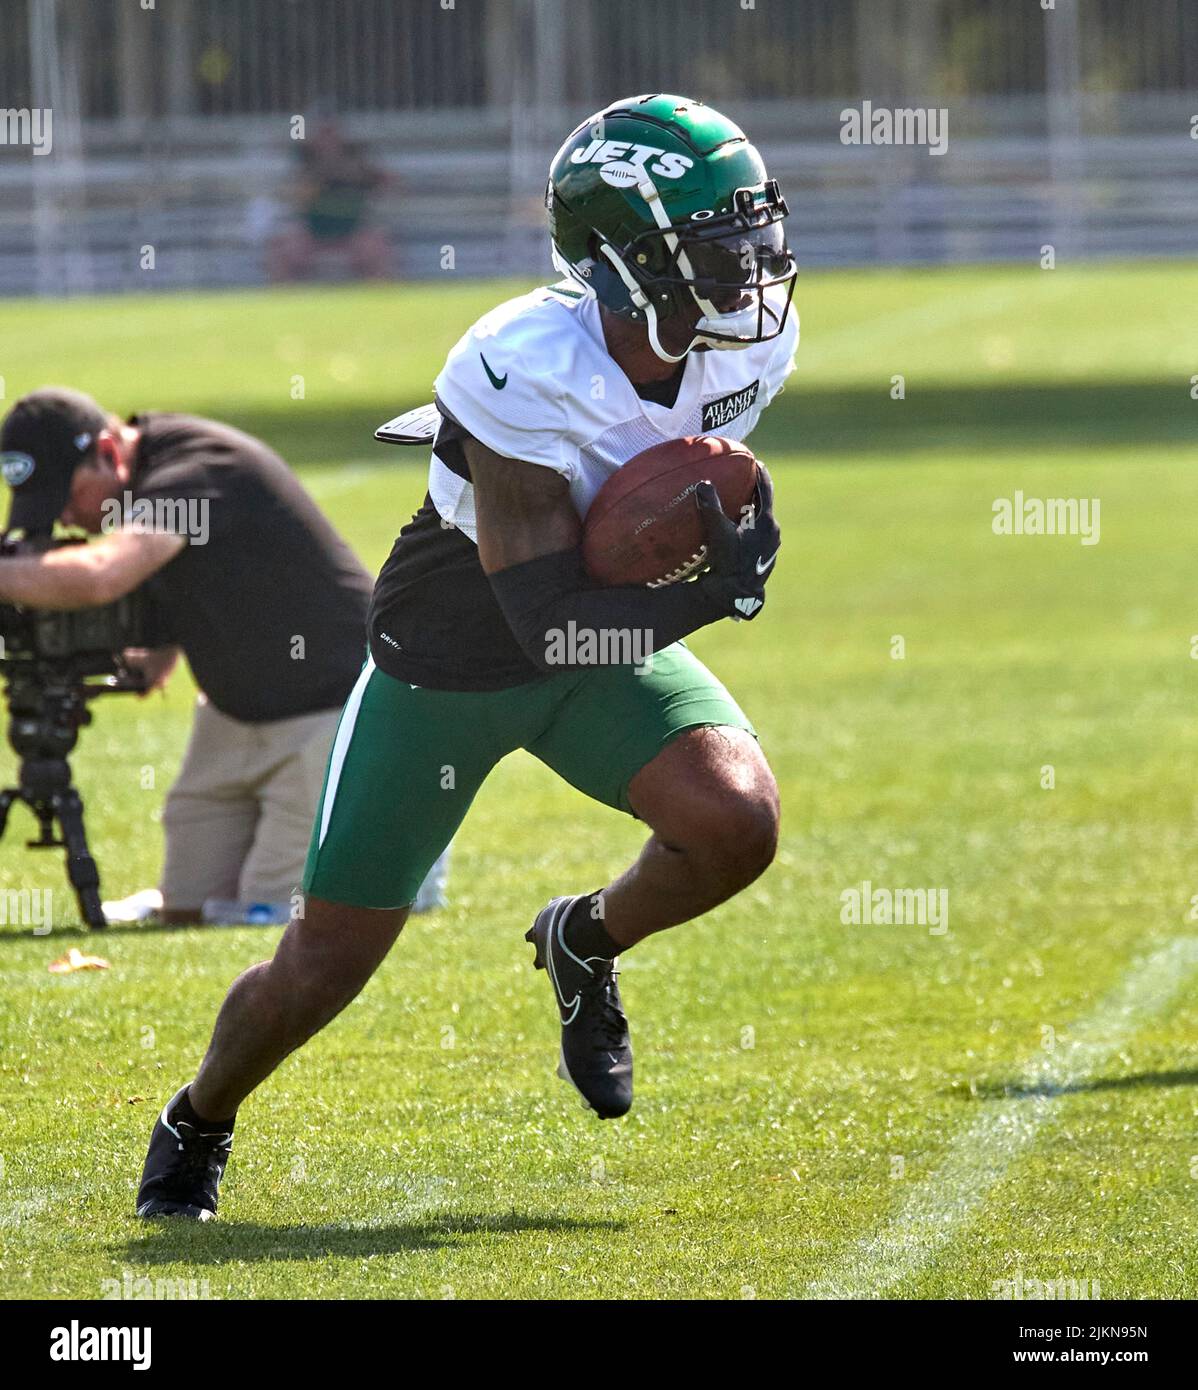 Florham Park, New Jersey, USA. August 2, 2022, Florham Park, New Jersey, USA: New York Jets' wide receiver Elijah Moore (8) receiving a punt during Jets training camp at the Atlantic Health Jets Training Center, Florham Park, New Jersey. Duncan Williams/CSM Credit: Cal Sport Media/Alamy Live News Stock Photo